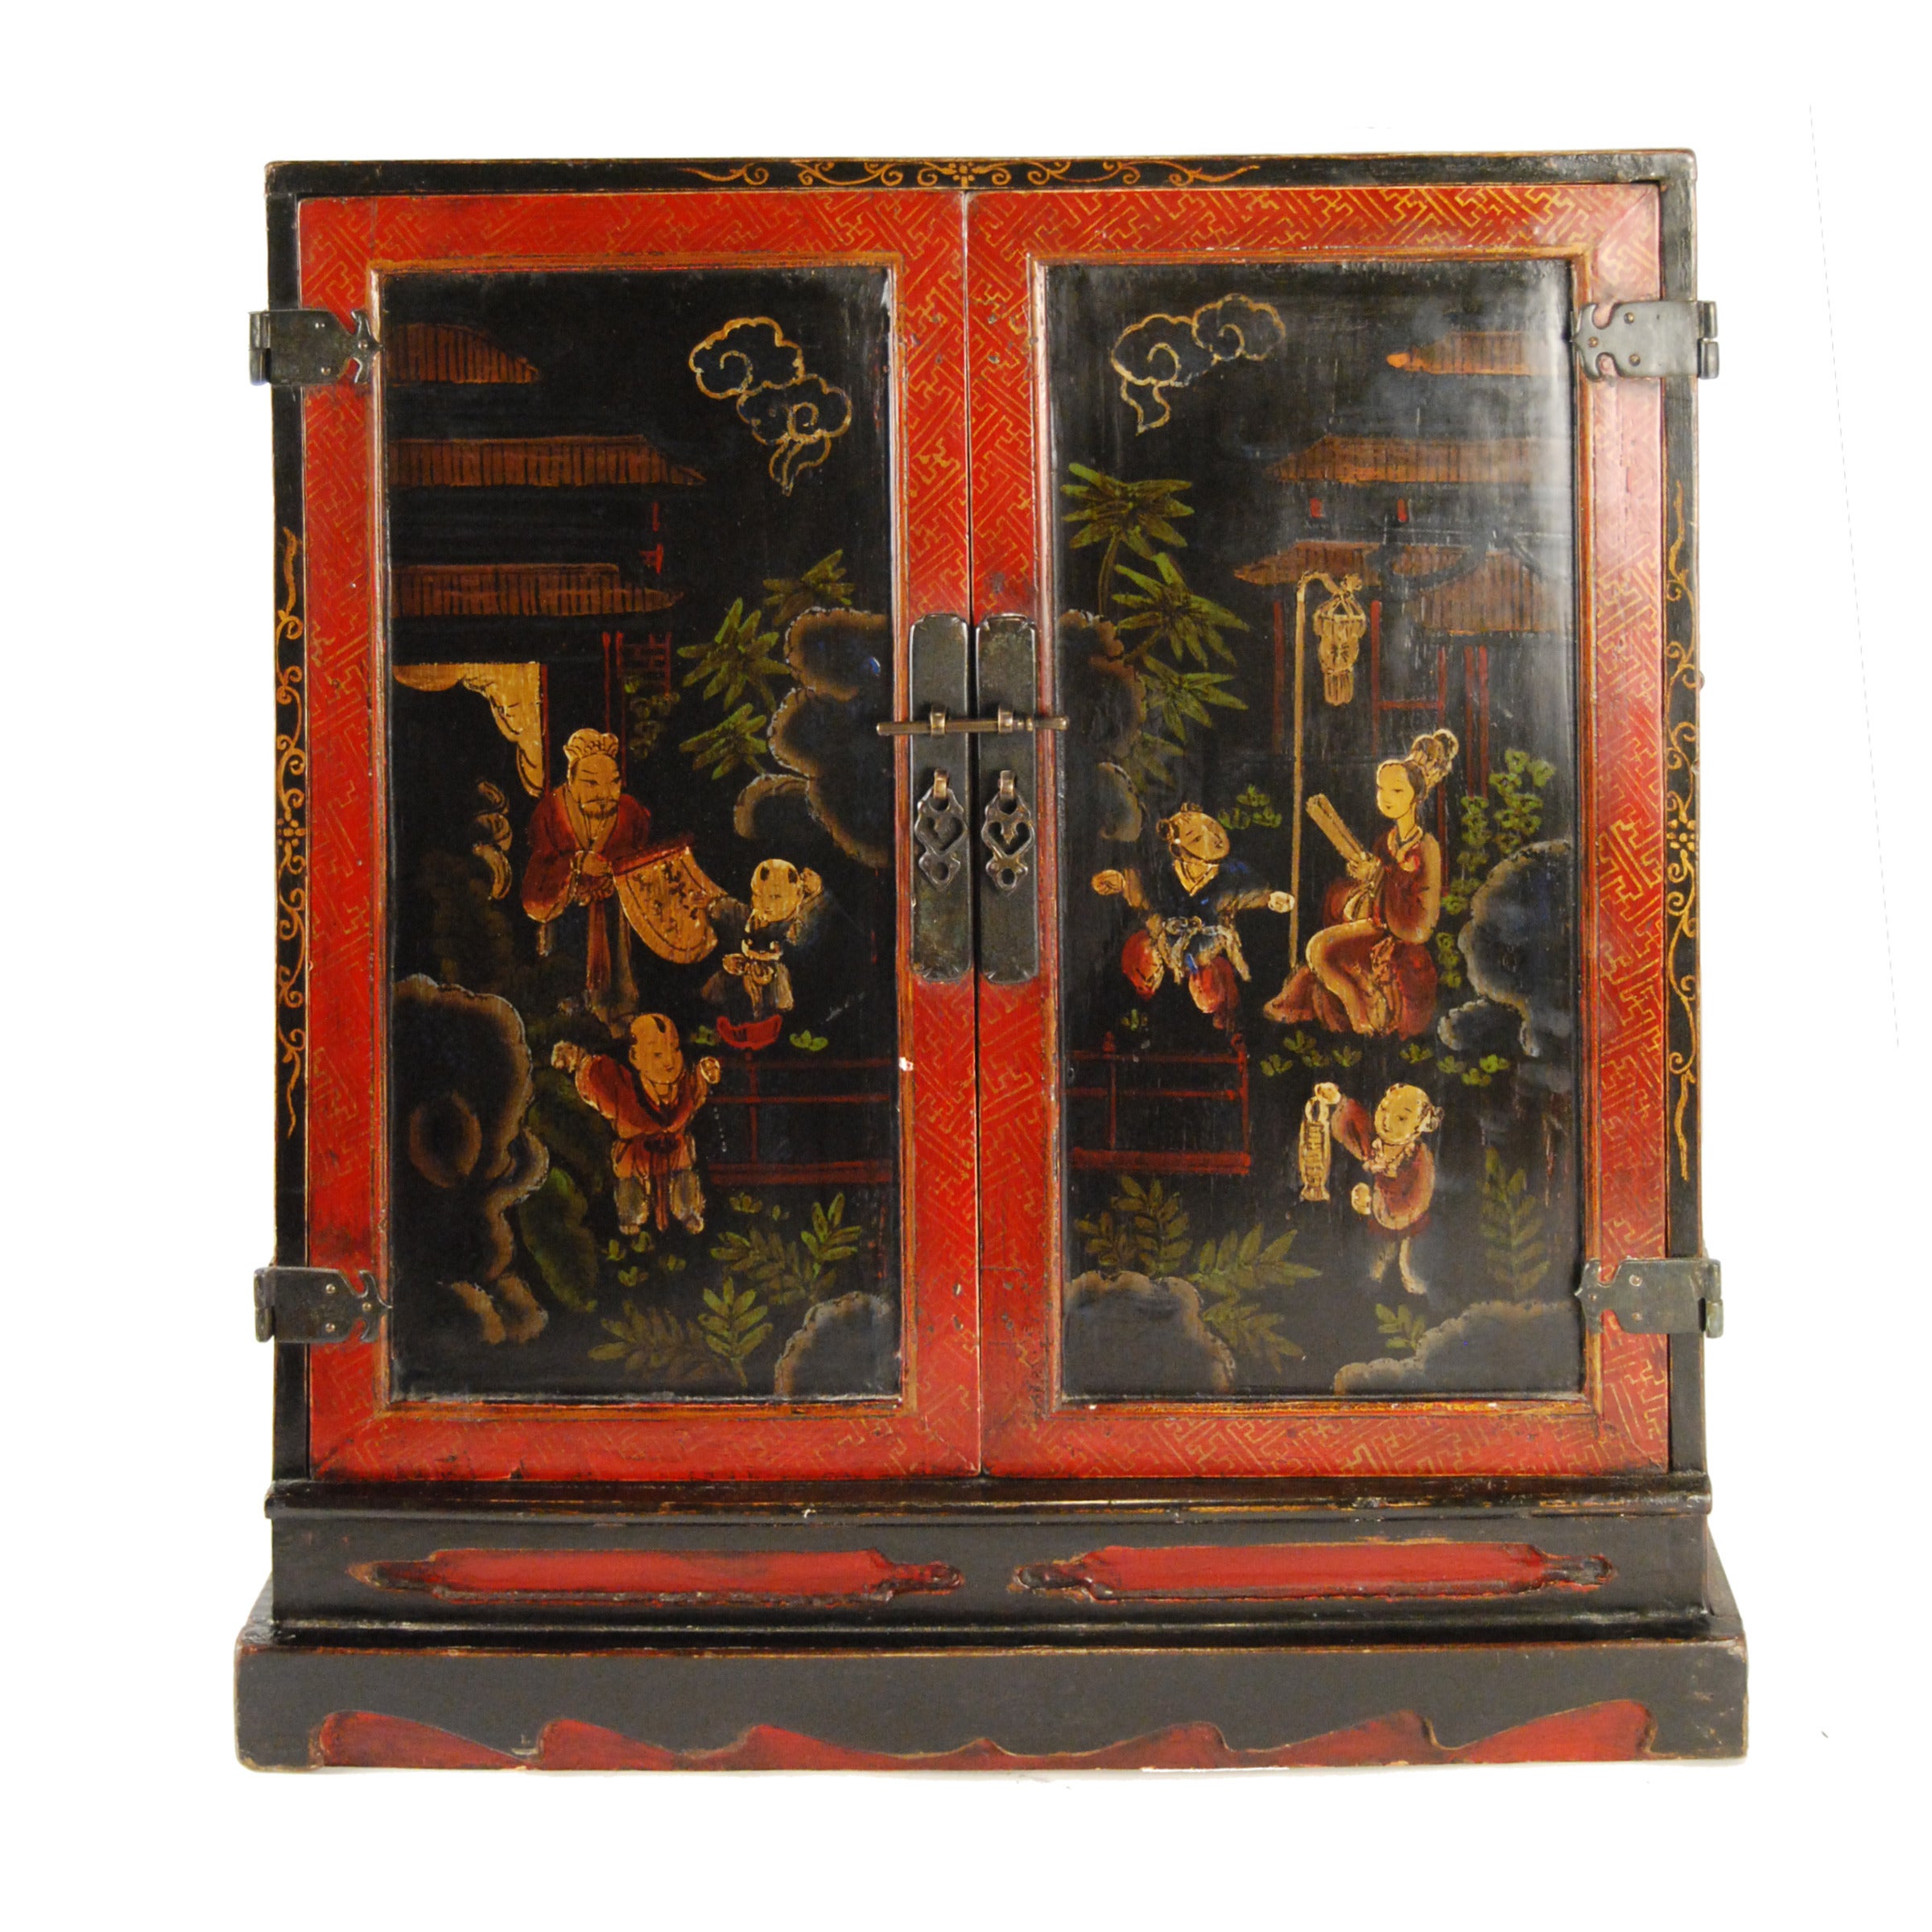 Early 20th Century Chinese Painted Small Altar Cabinet